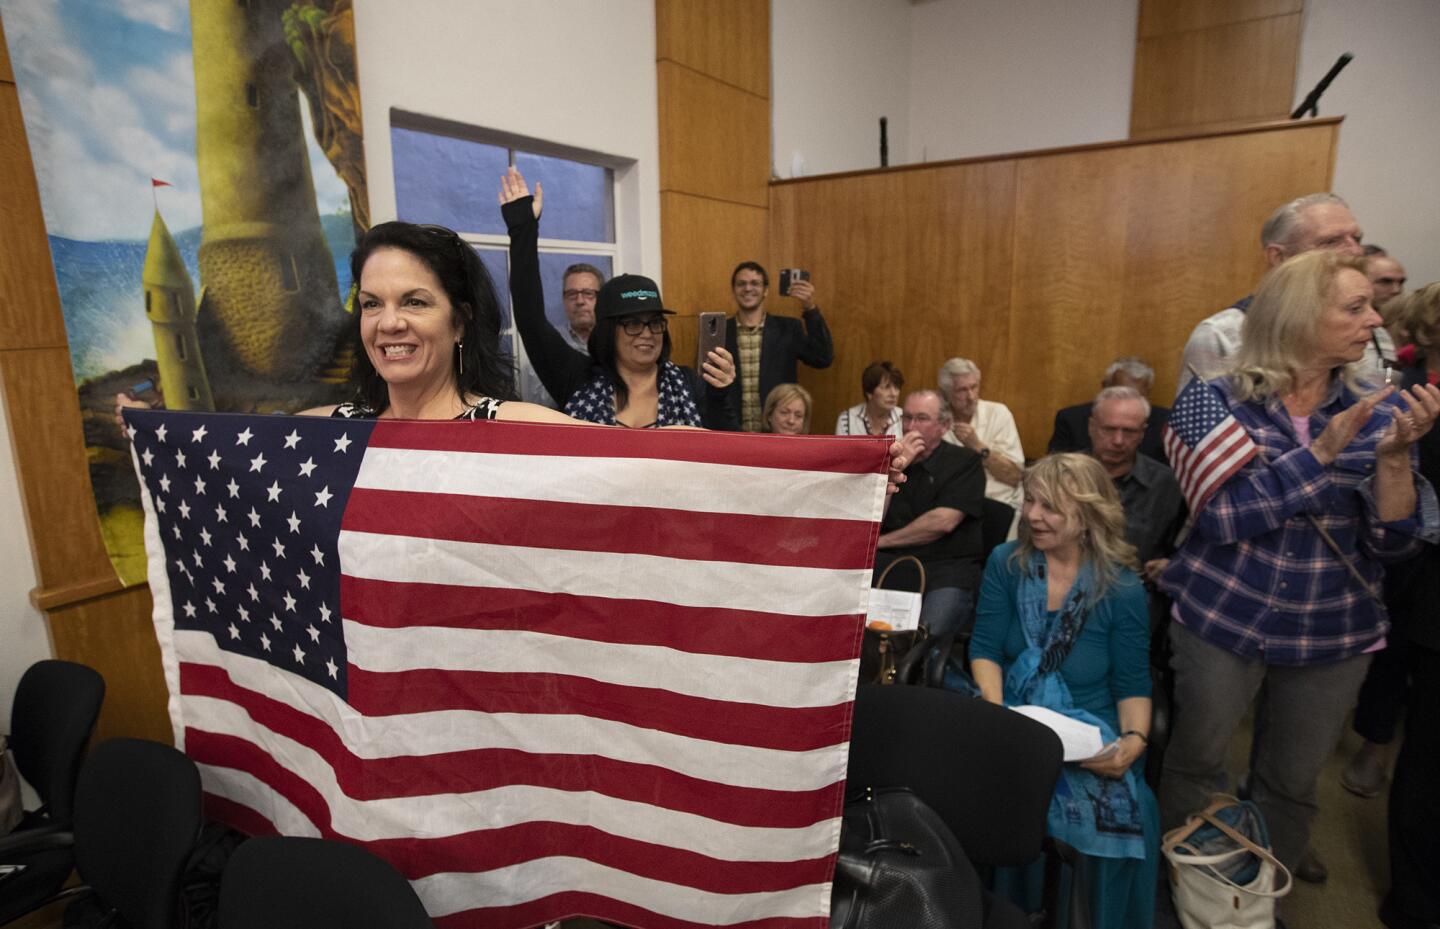 Lisa Collins holds an American flag during a Laguna Beach City Council meeting Tuesday in which the council considered the flag design on city police cars.